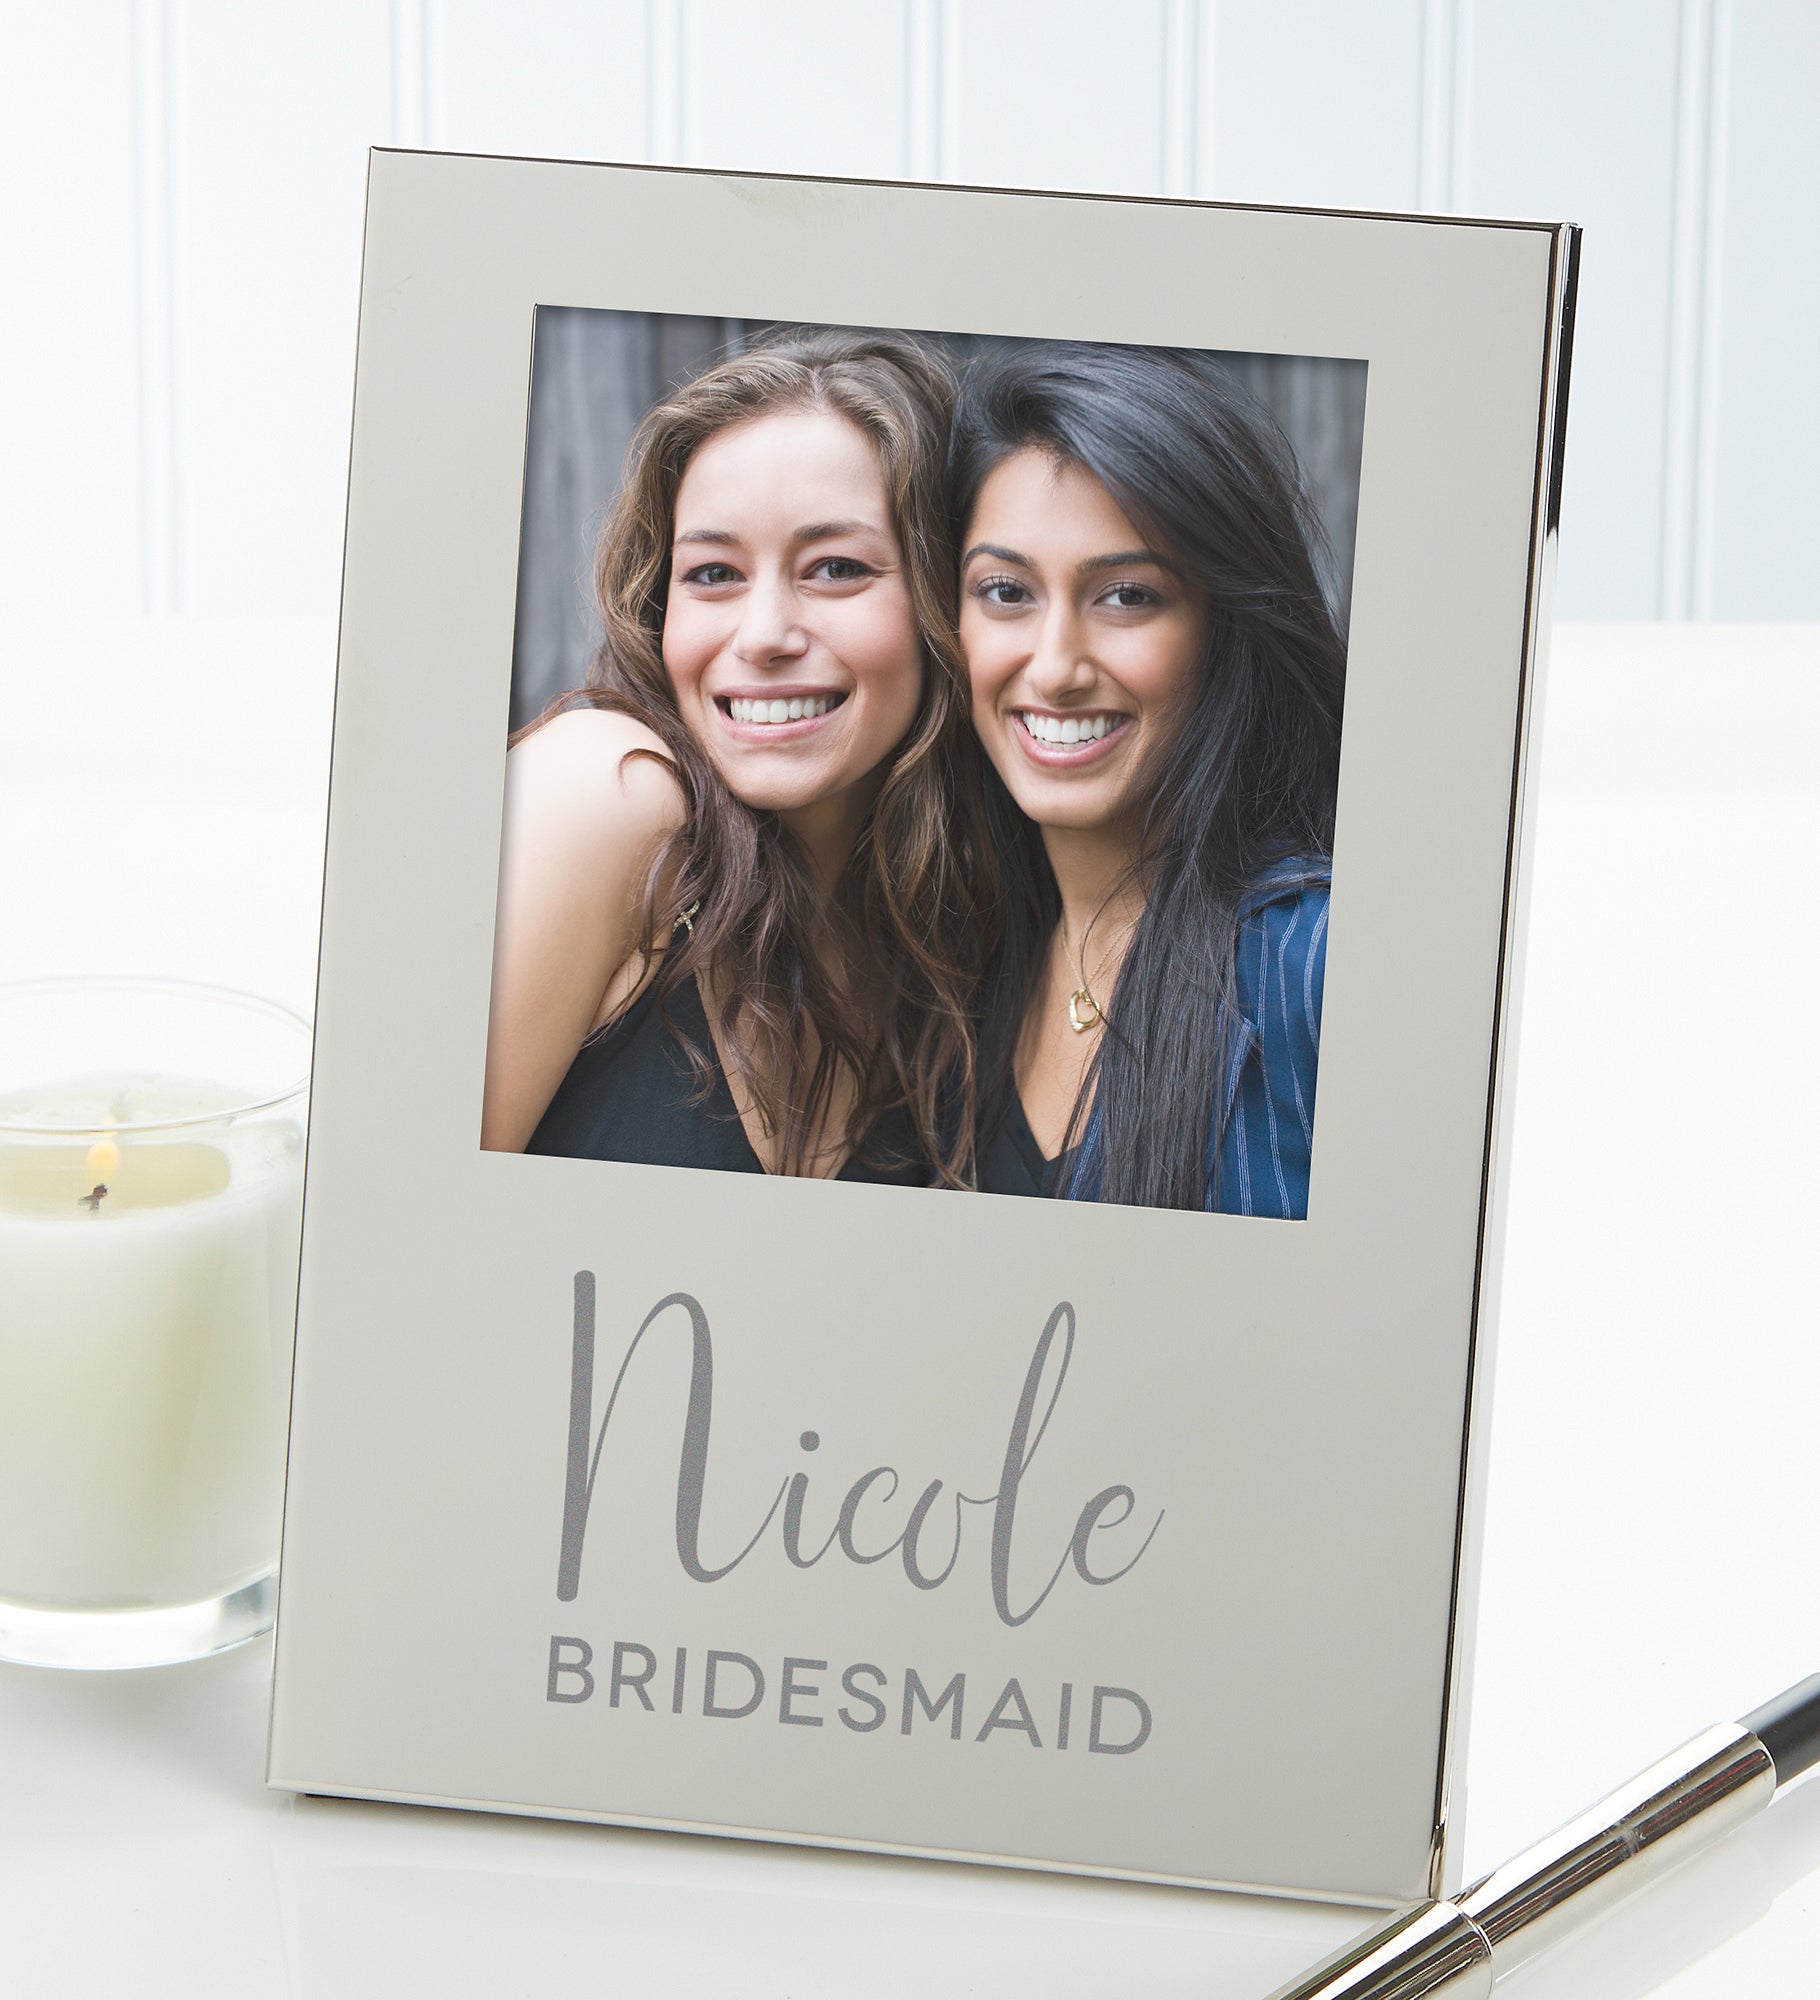 Bridesmaids Personalized Engraved Photo Frame